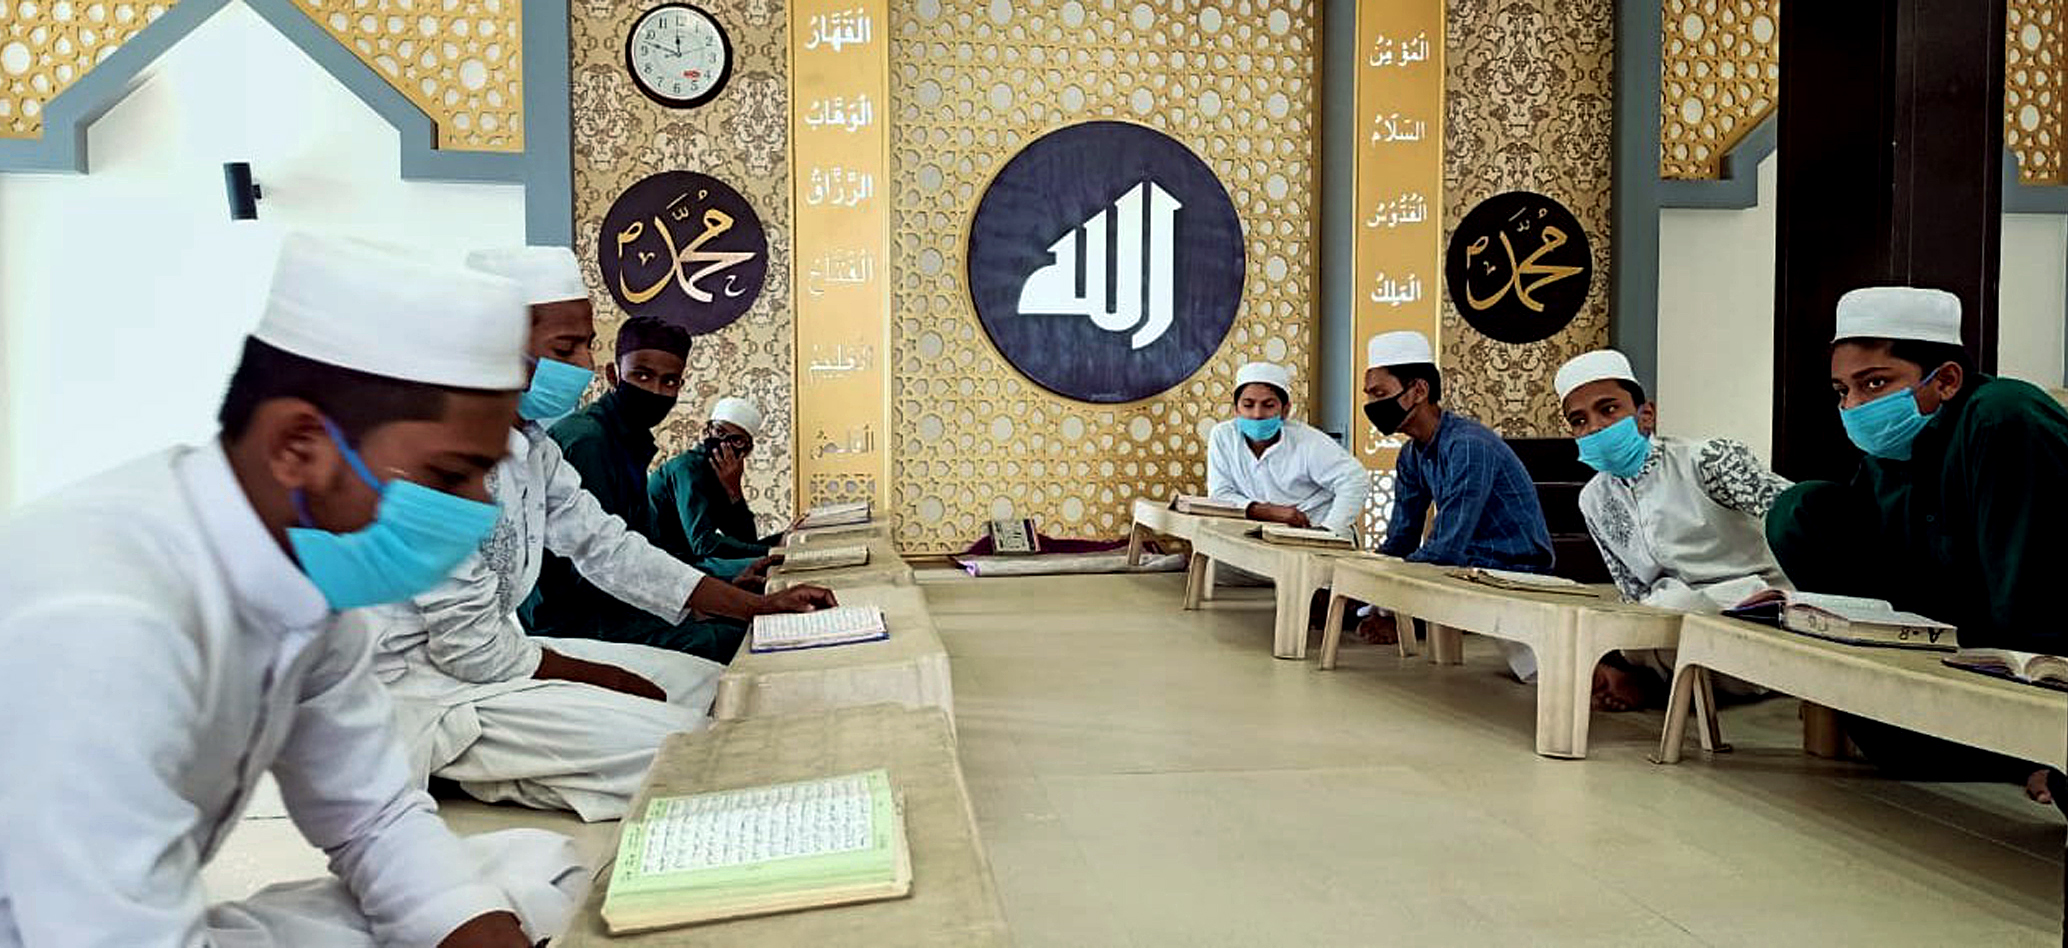 Over 6,000 UP madrasas found unrecognised, survey to continue